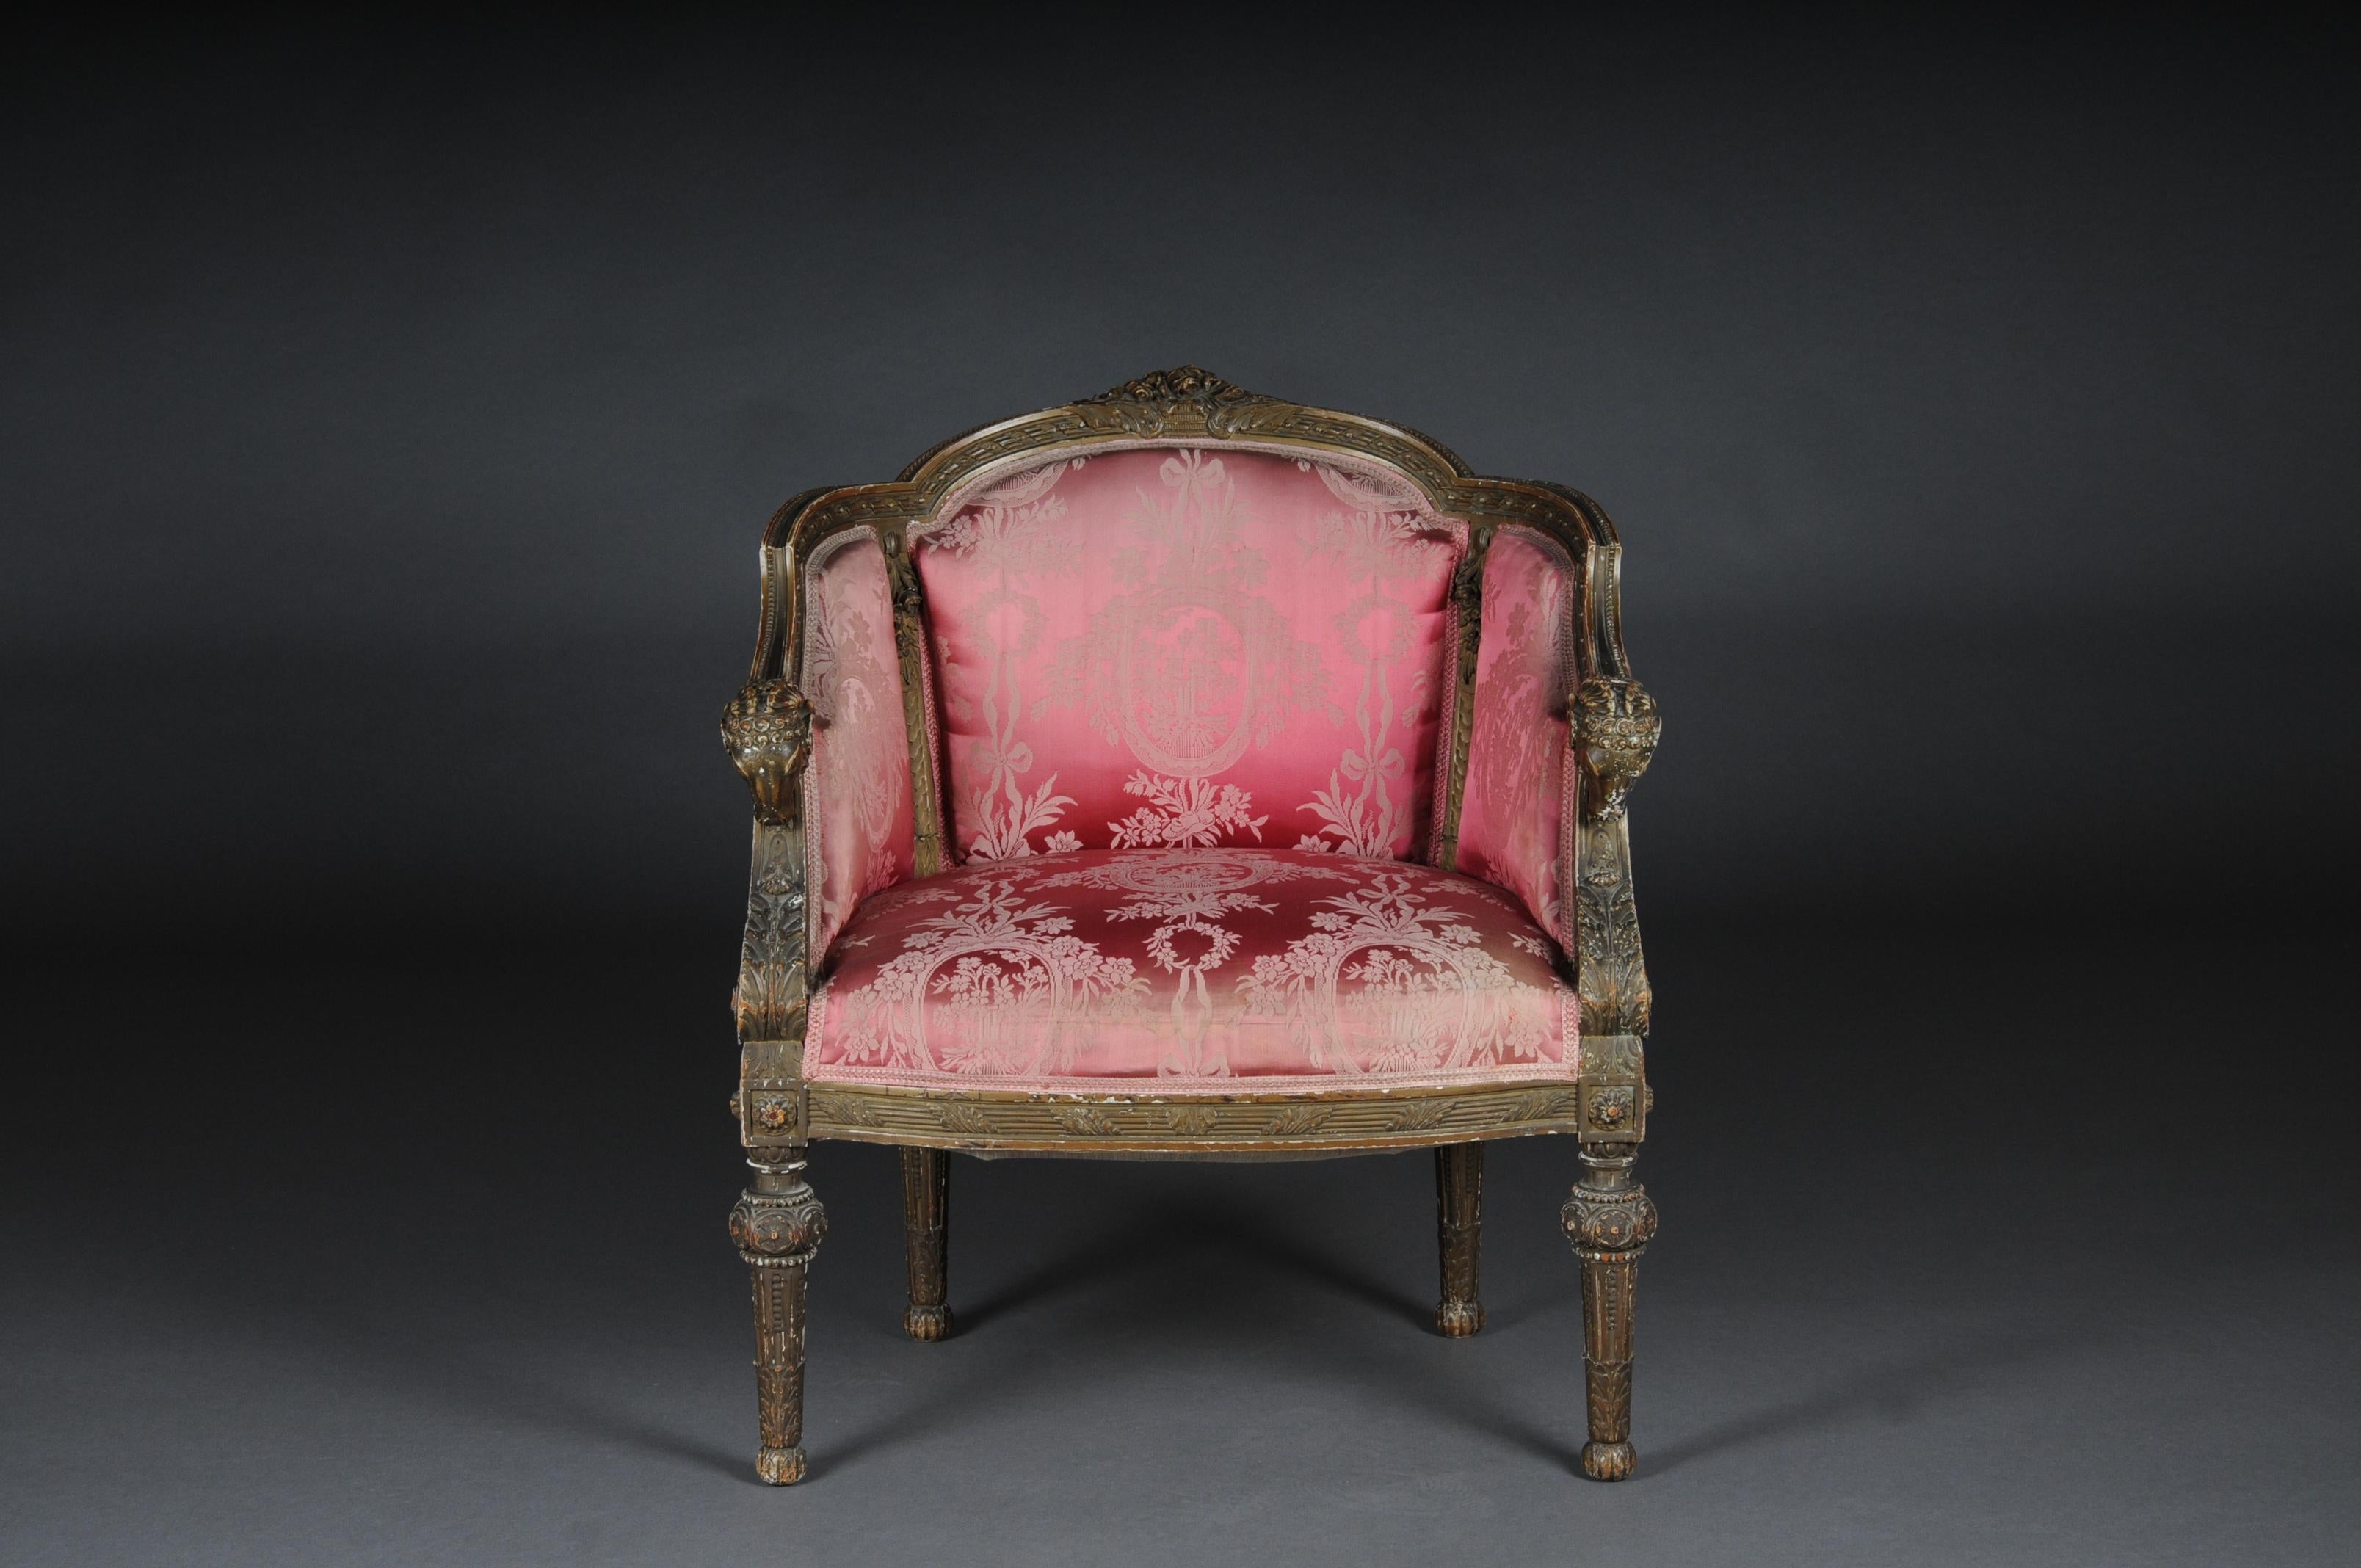 French armchair / armchair / bergère Napoleon III

Solid wood, carved, painted in gold.
Slightly curved frame on fluted legs. Slanted, fluted, slightly rising armrests. Curly, backrest framing. The seat and backrest are finished with historical,